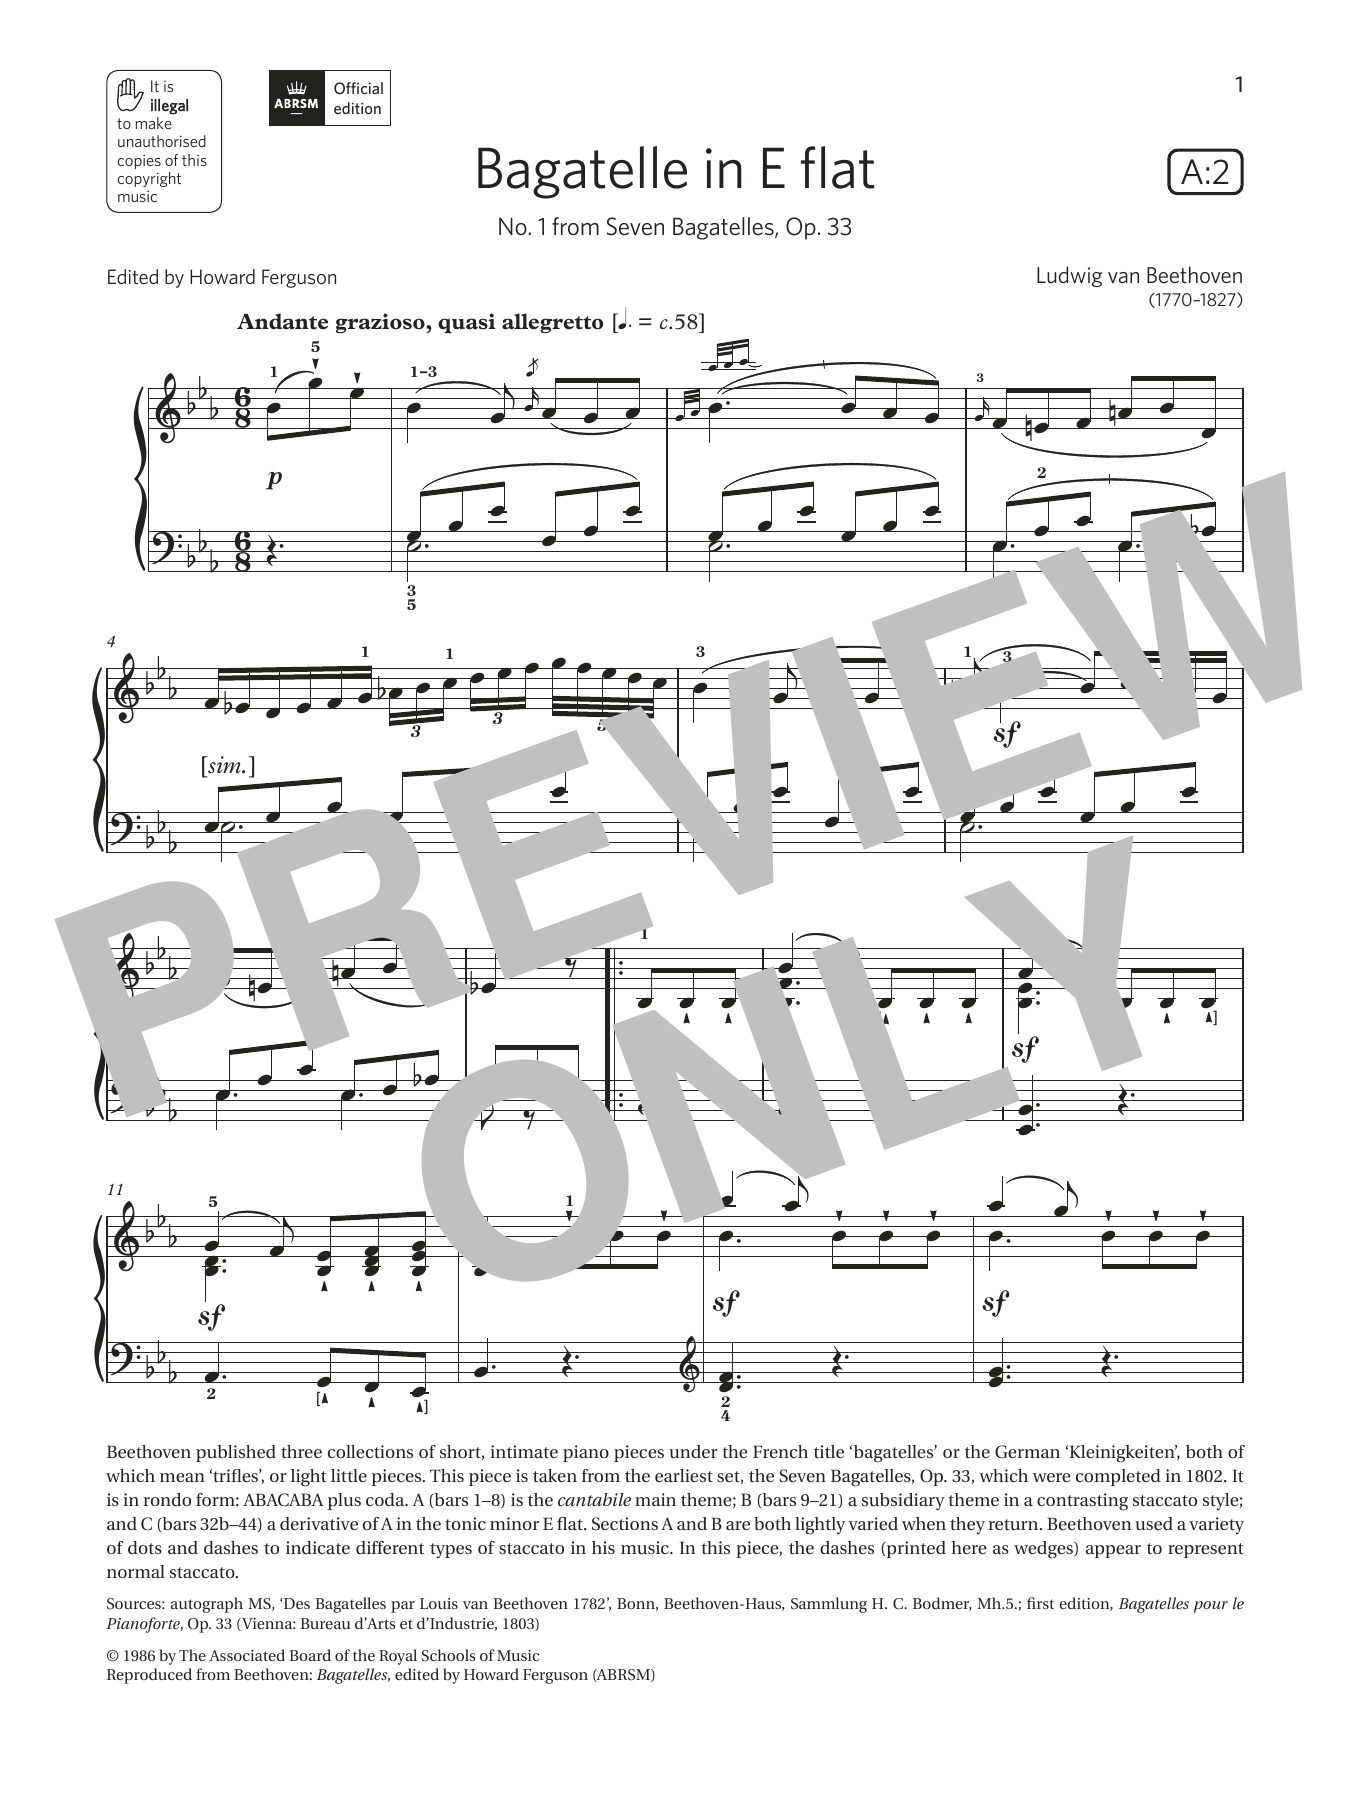 Download Ludwig van Beethoven Bagatelle in E flat (Grade 7, list A2, Sheet Music